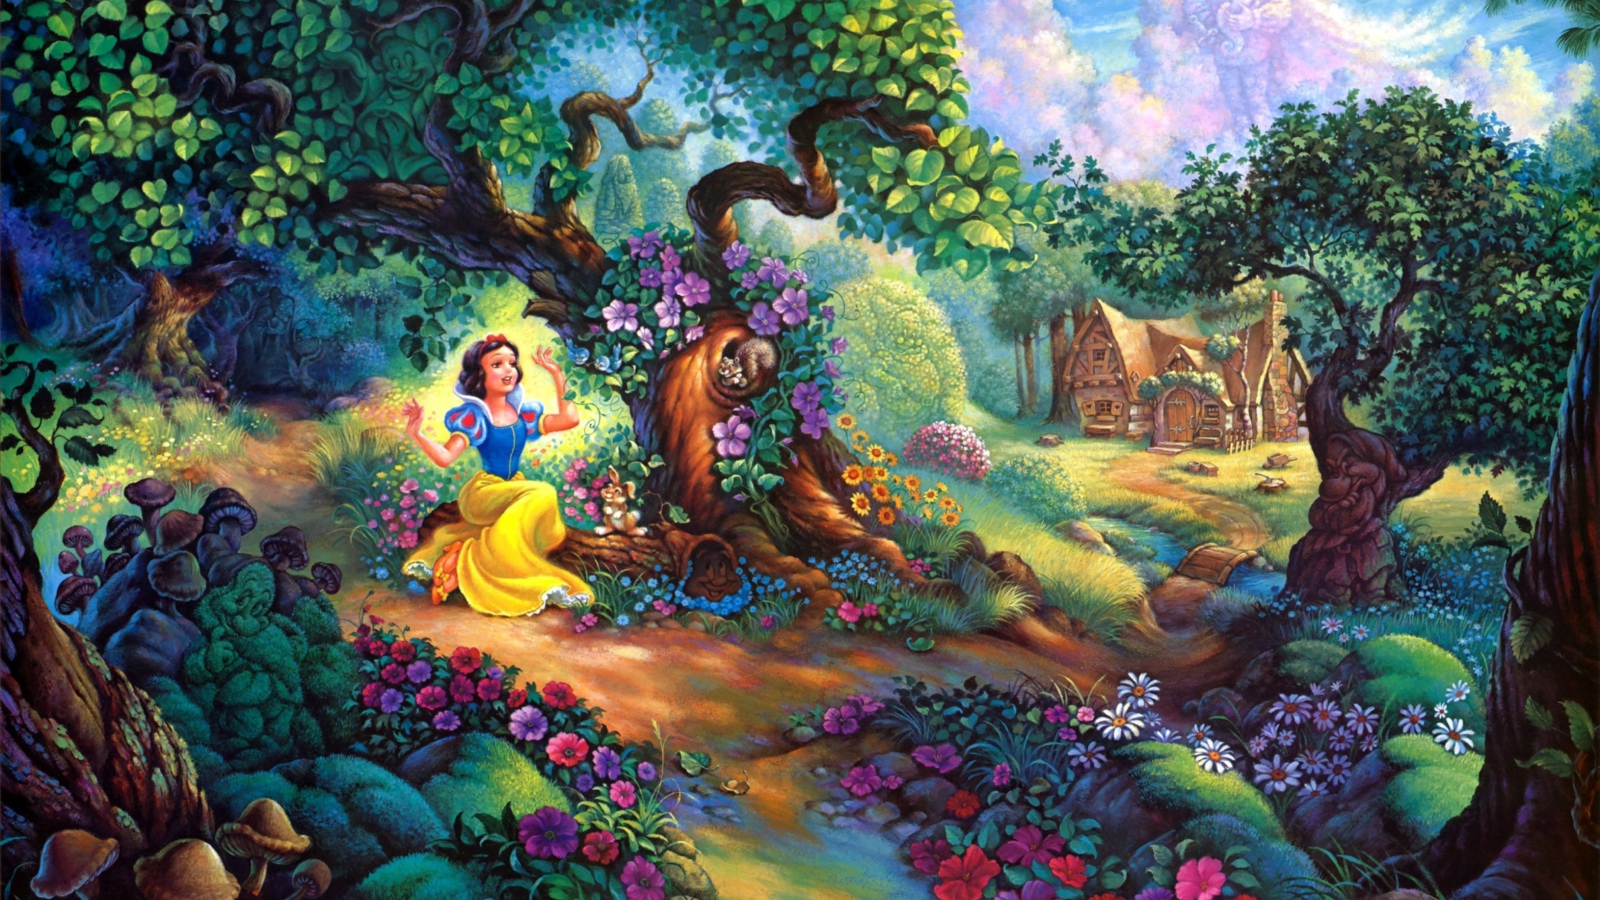 Snow White In Magical Forest wallpaper 1600x900